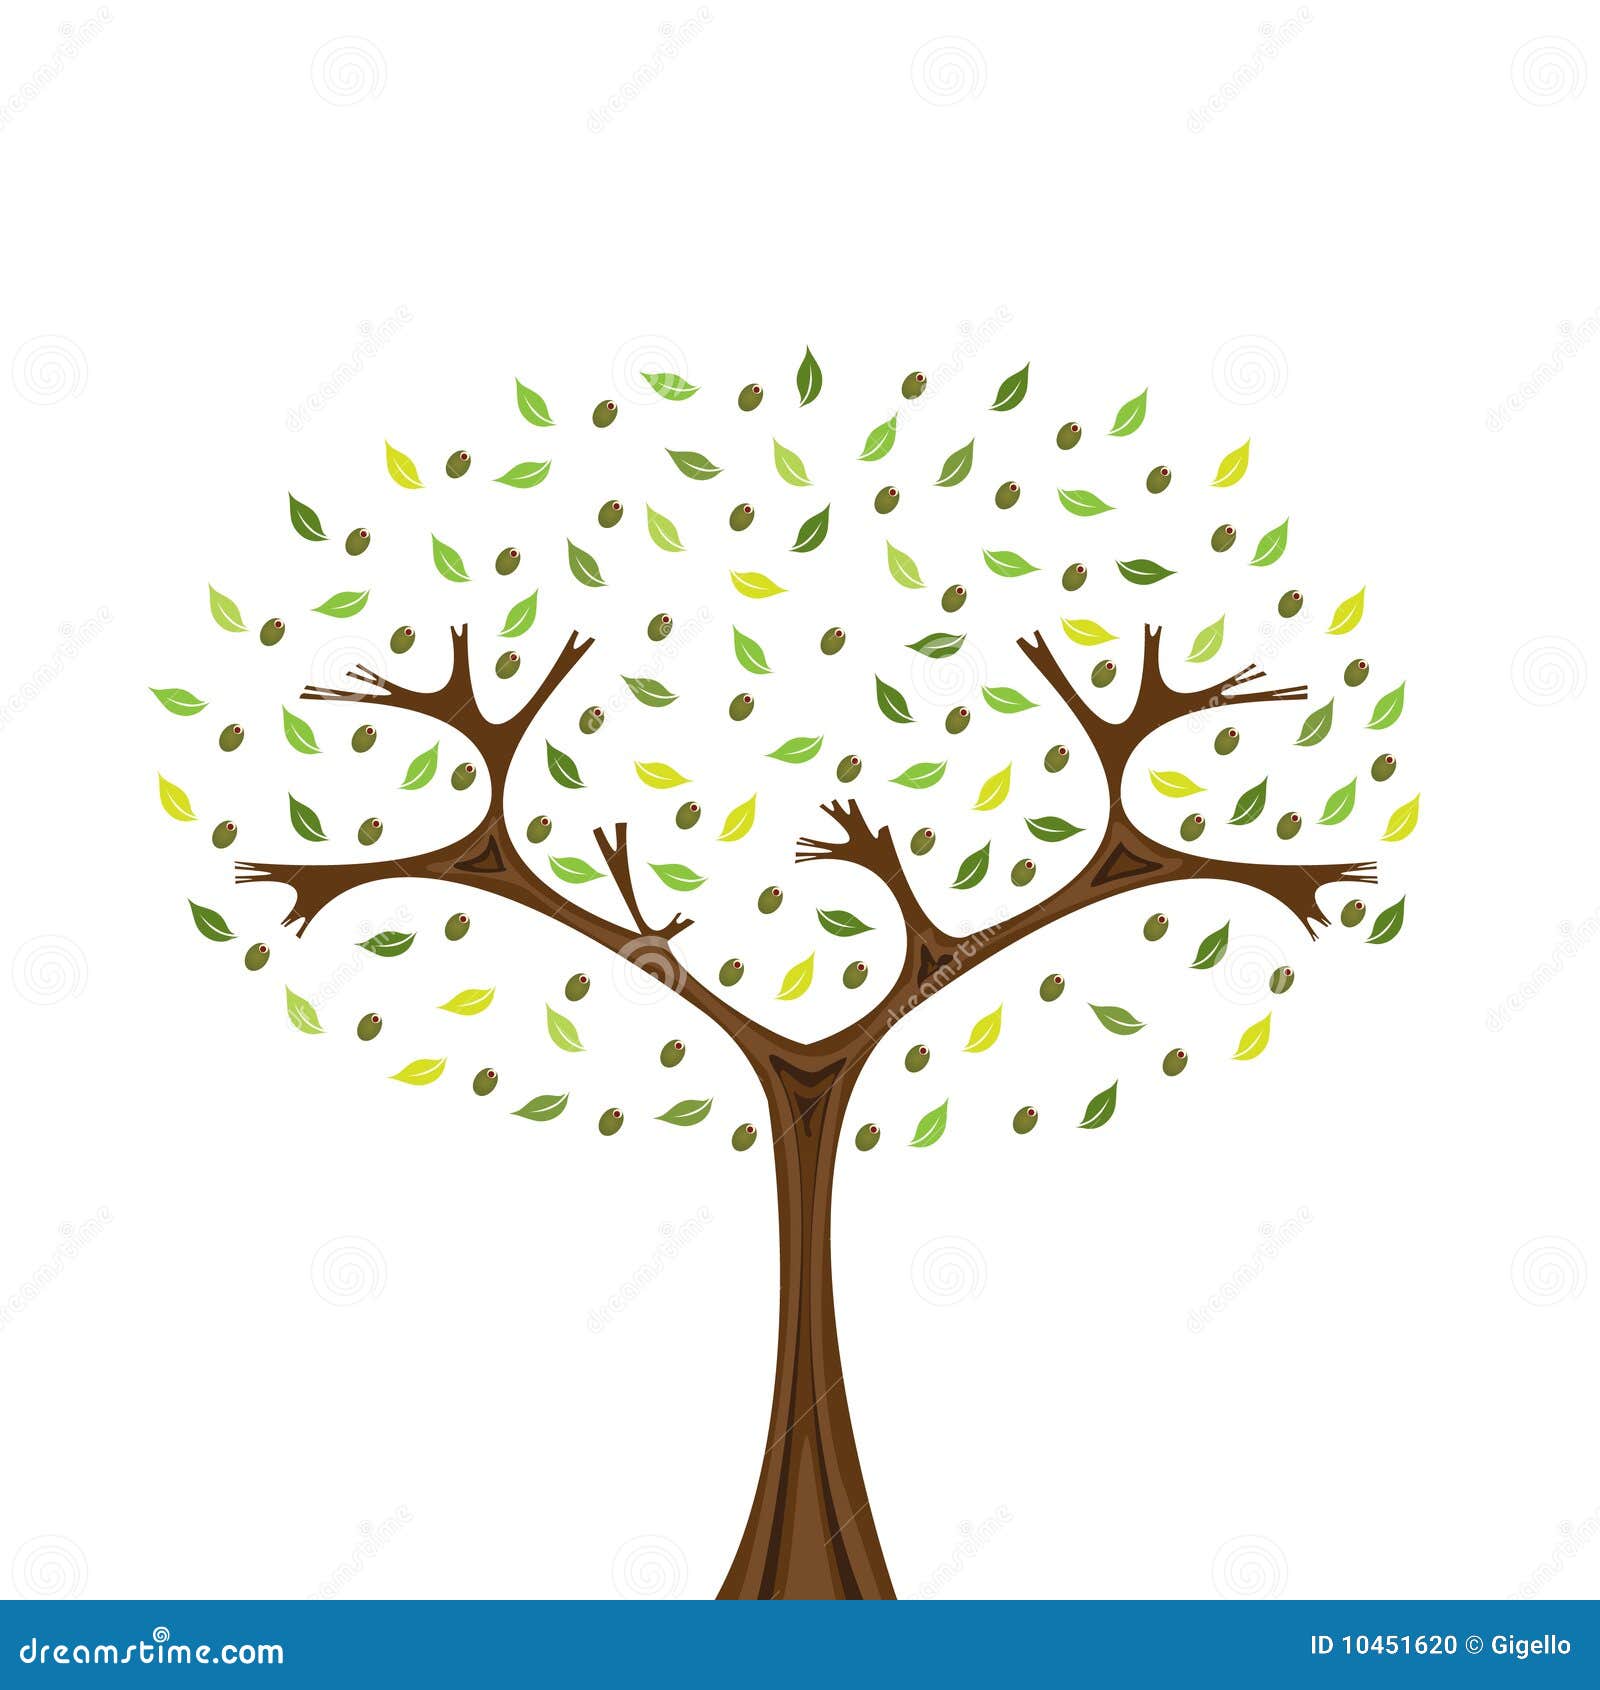 olive tree clip art images - photo #32